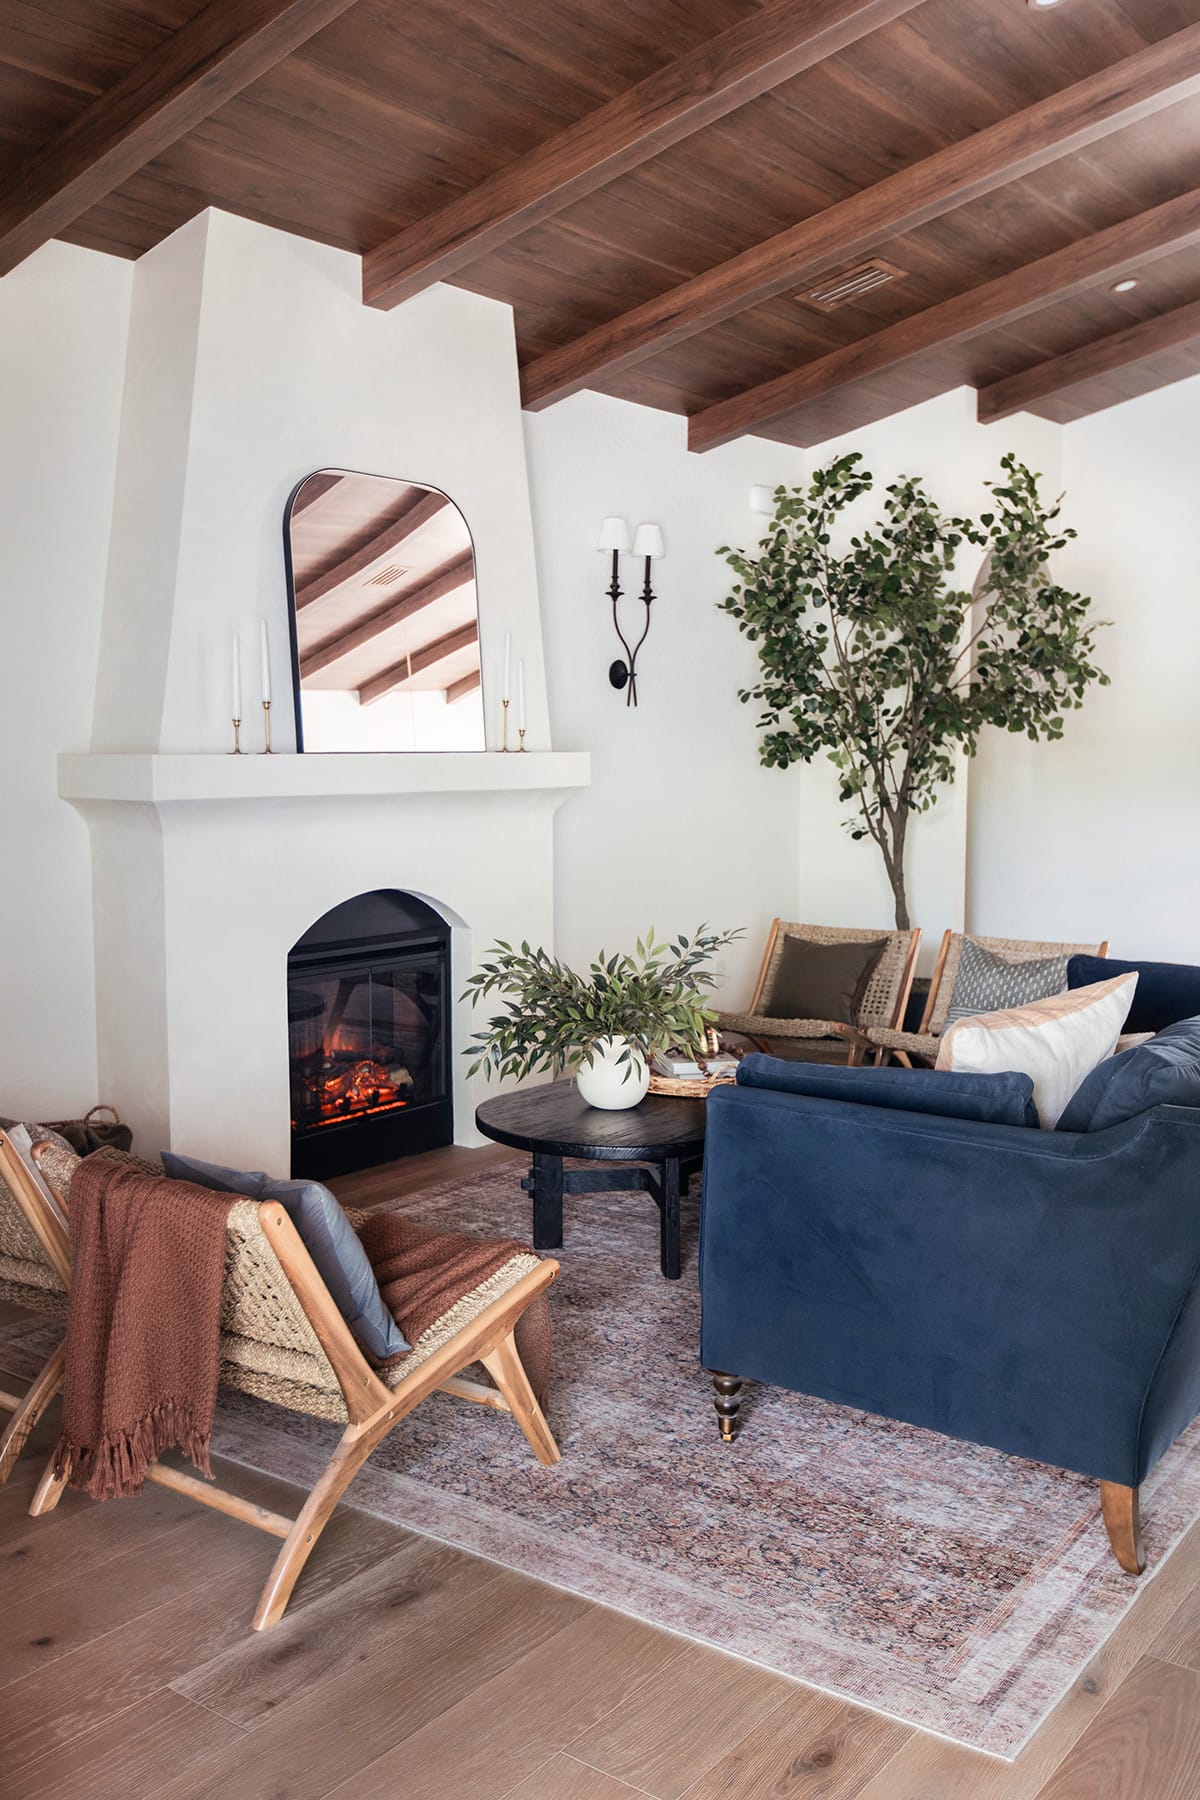 spanish style living room with diy wood beam ceiling and alabaster walls